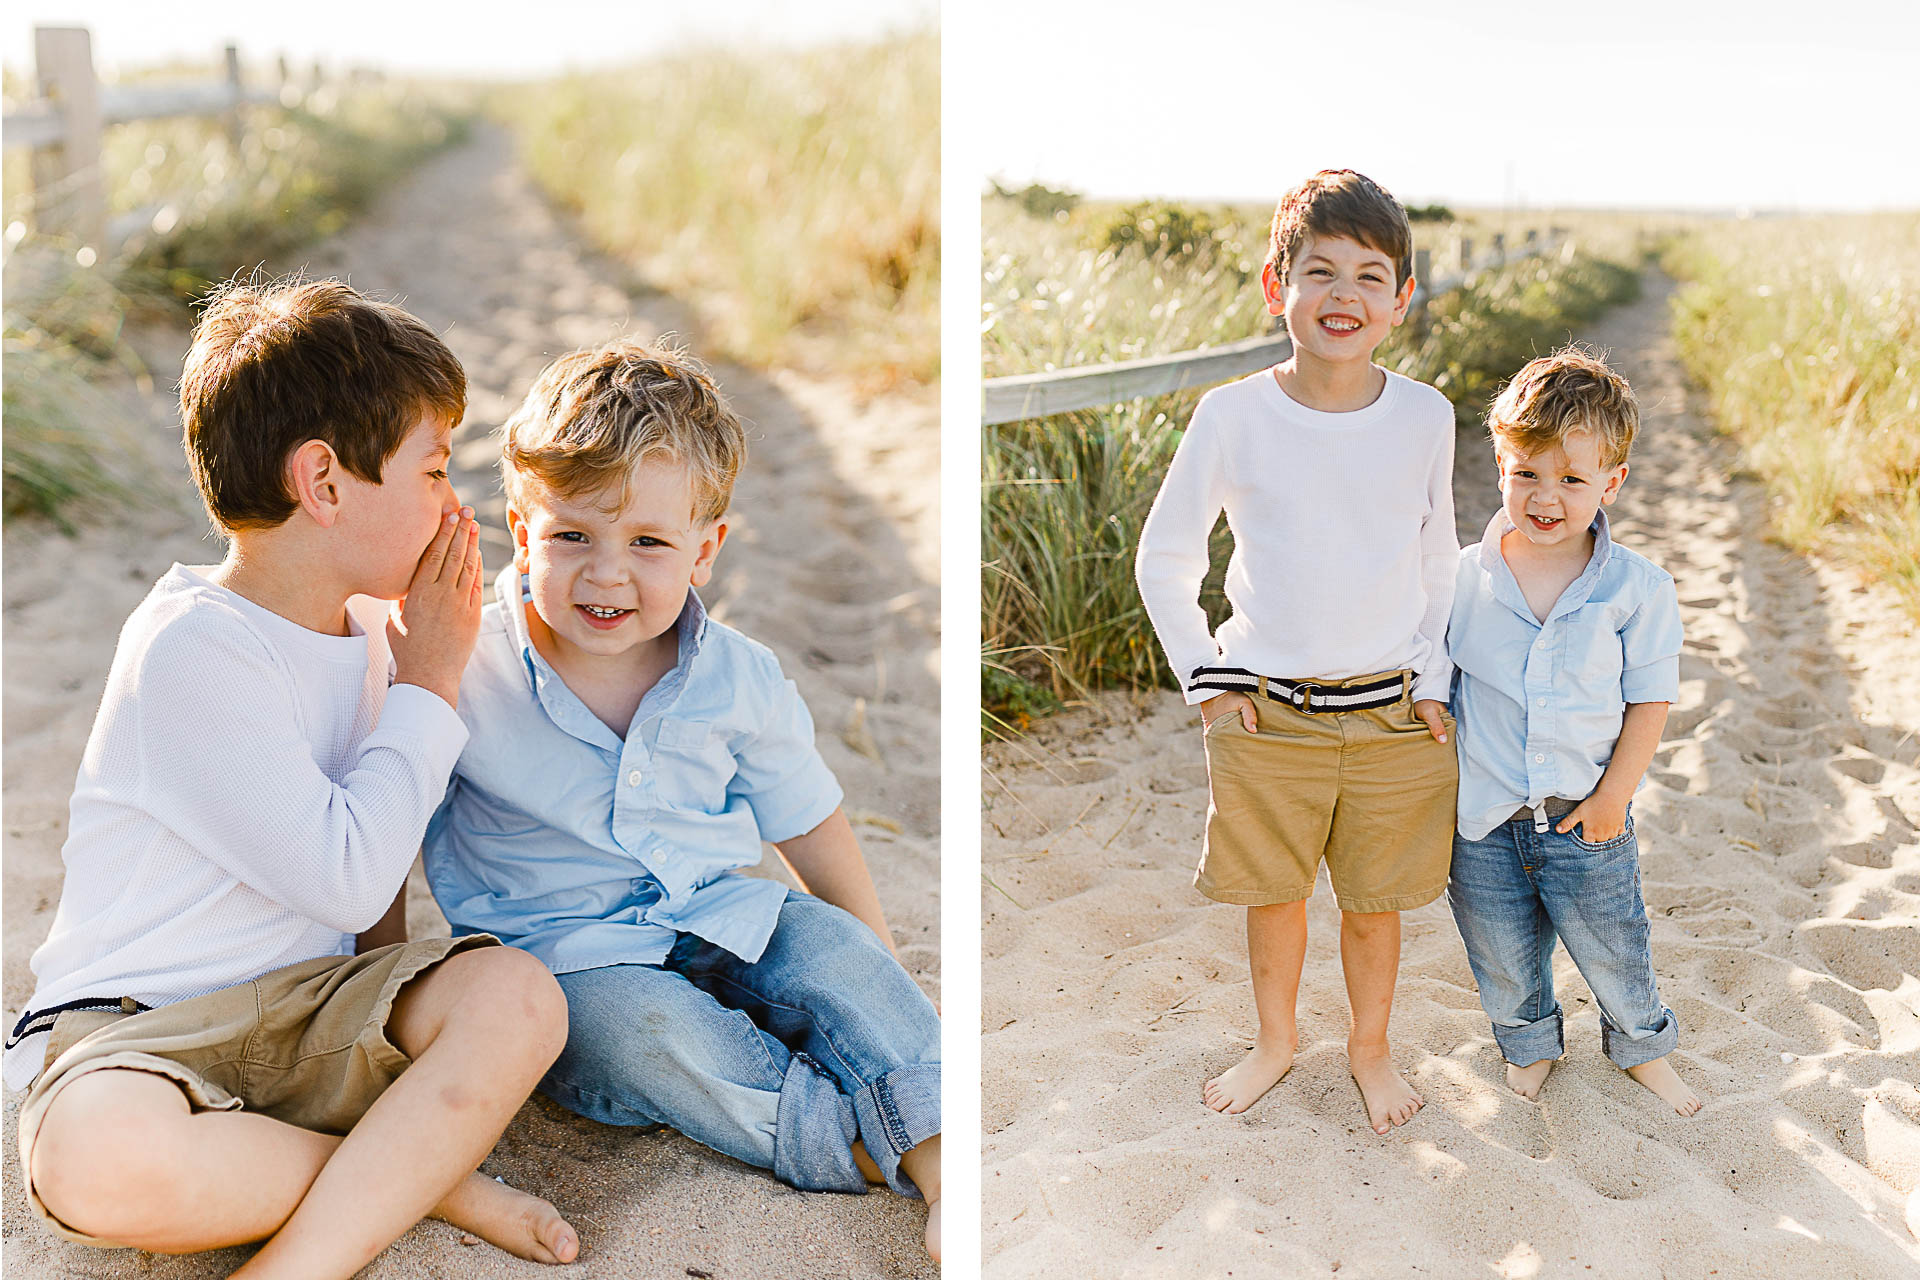 Watch Hill Family Portraits by Christina Runnals Photography | Brothers standing together and whispering secrets